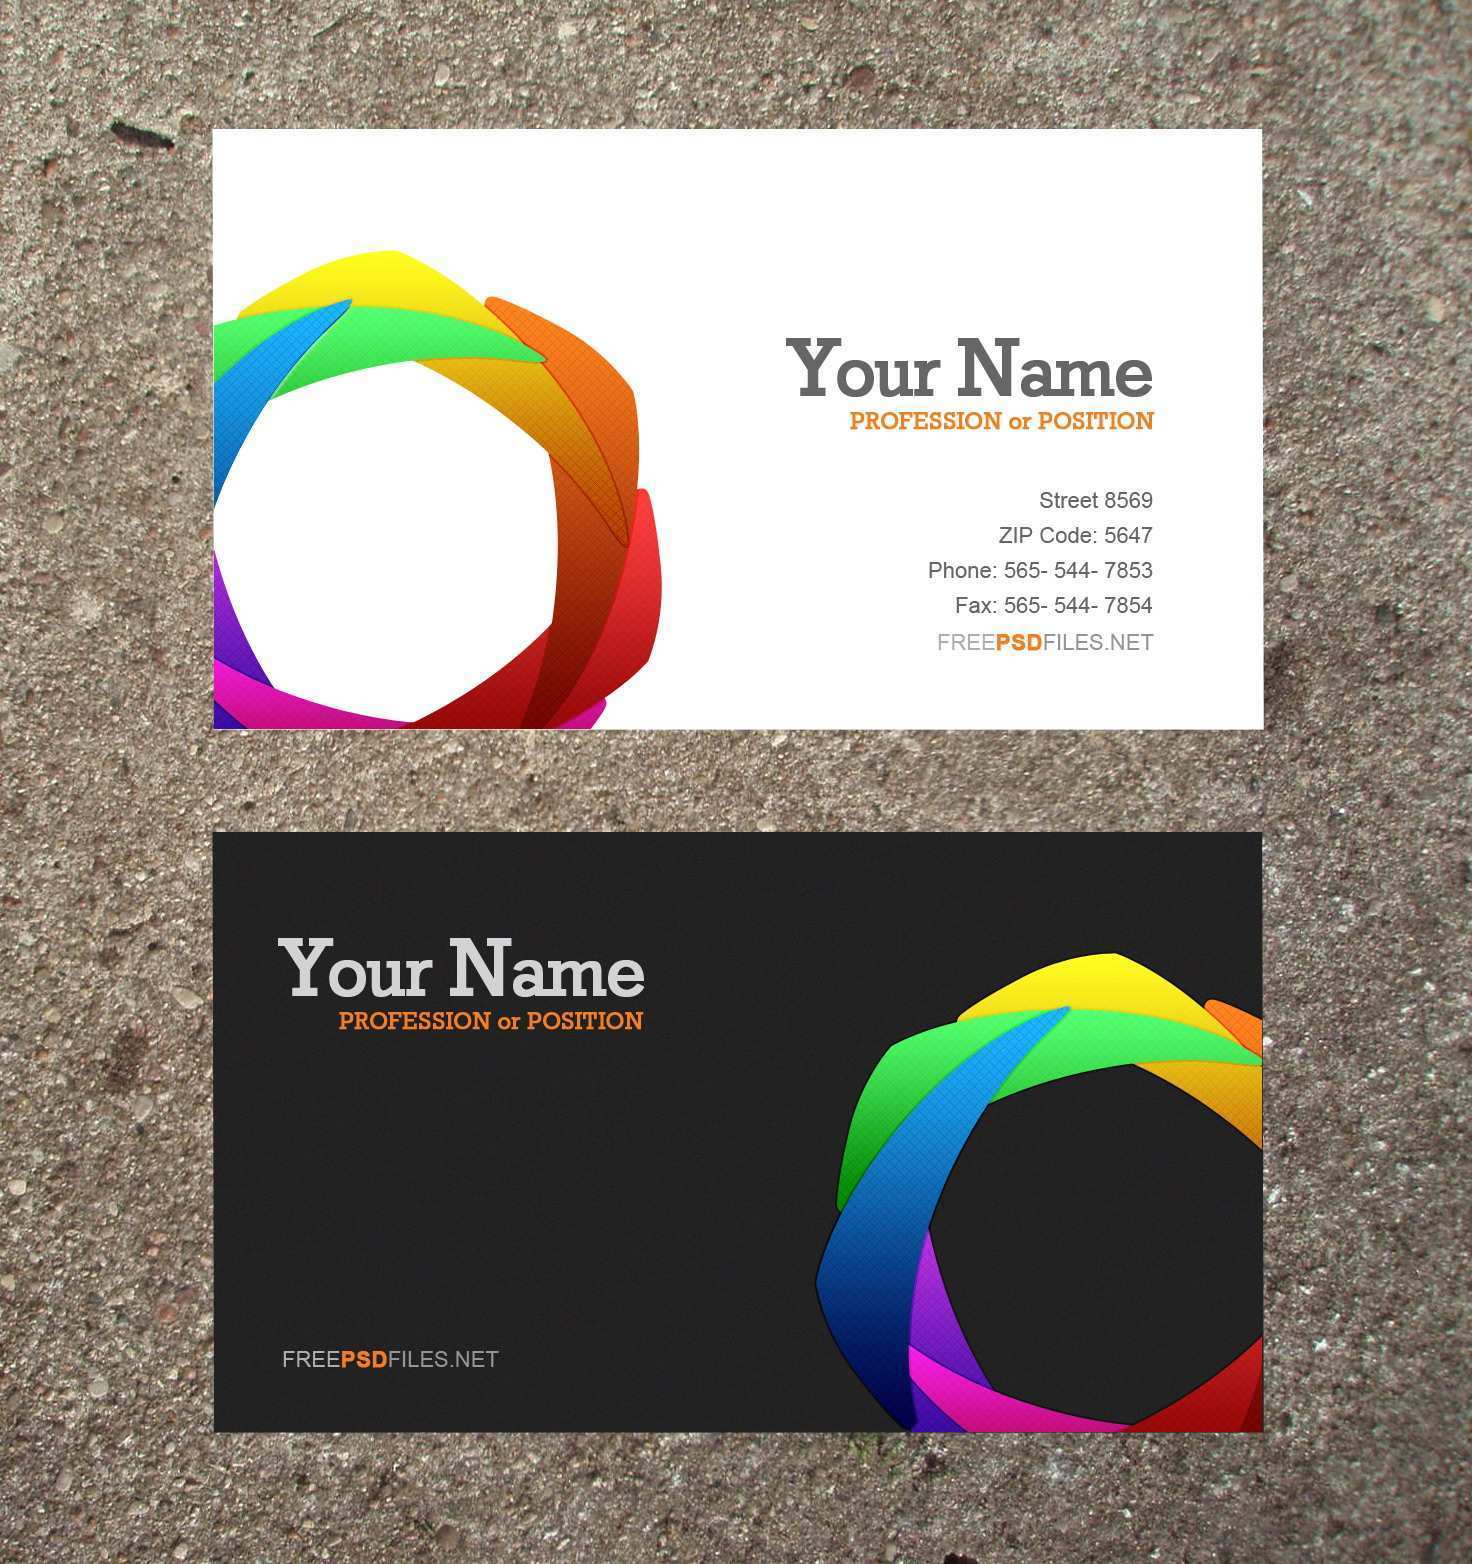 Calling Card Template Free Online Cards Design Templates